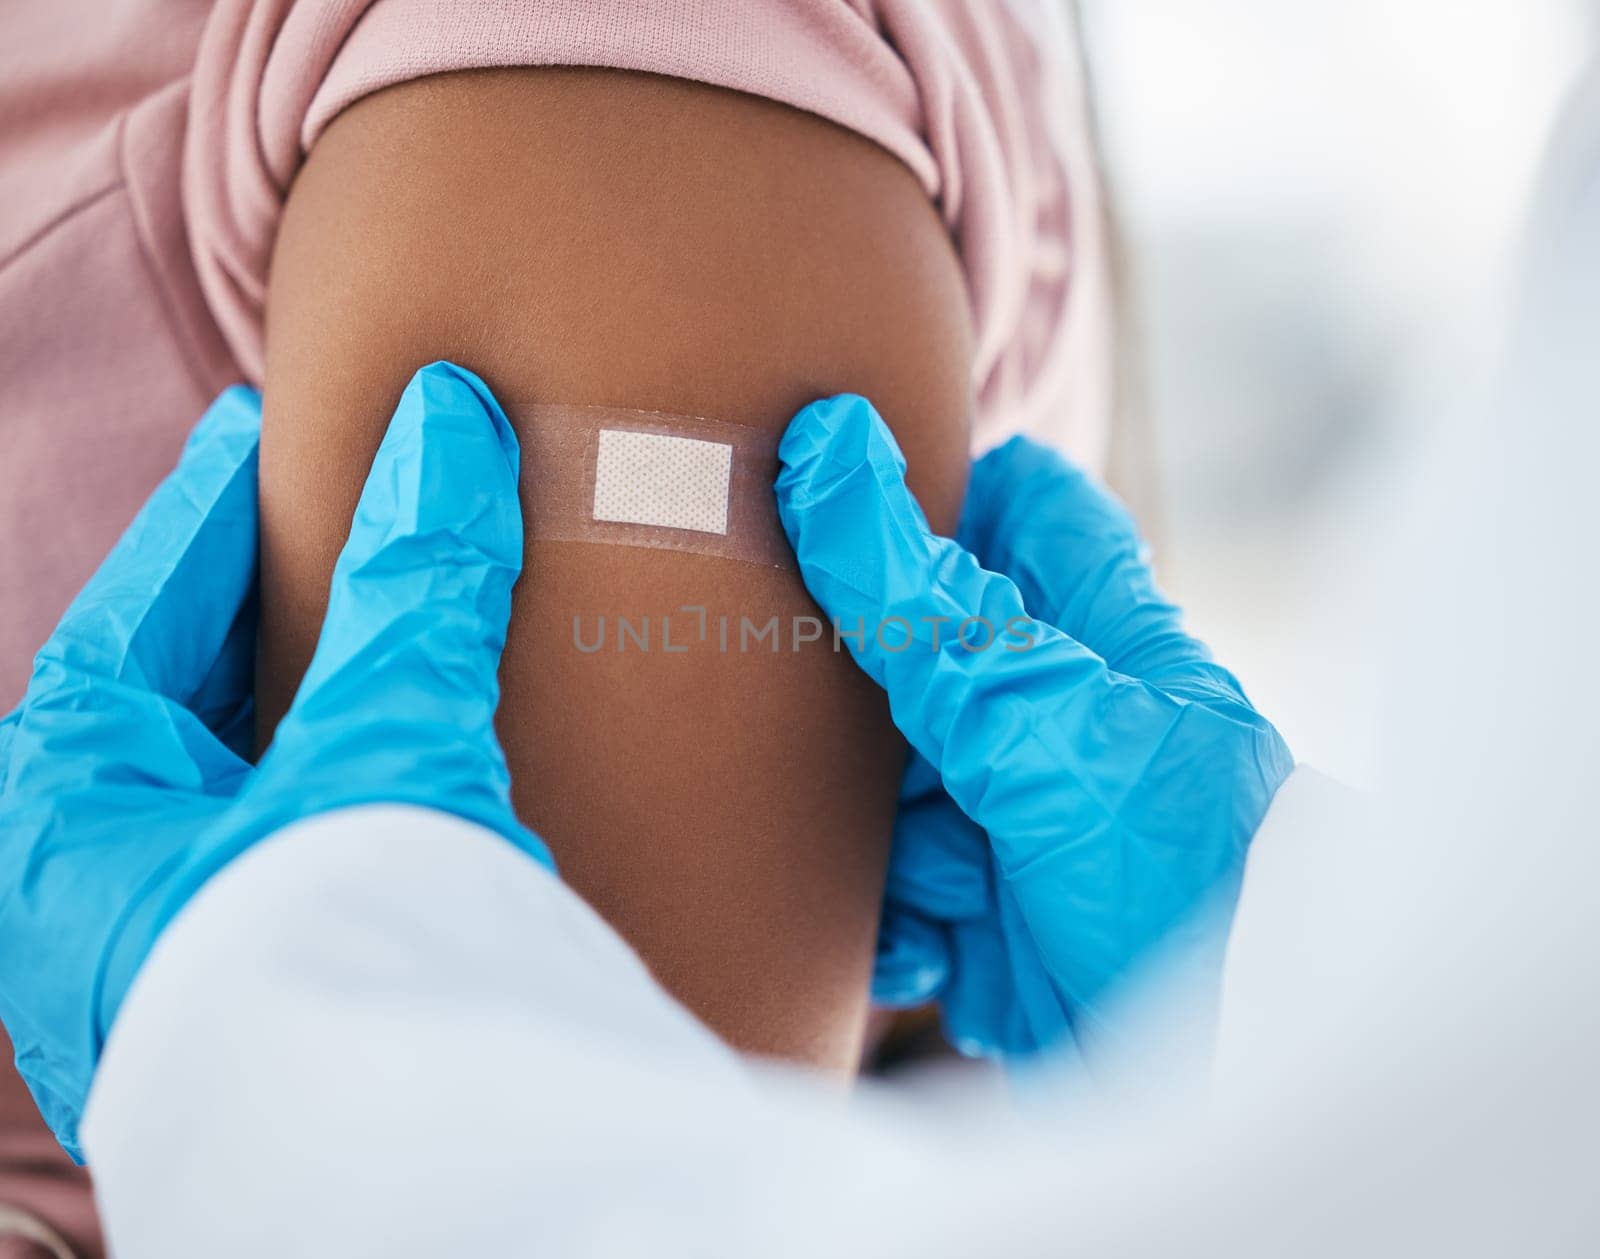 Plaster on patient arm from doctor, vaccine and flu shot, healthcare and medical insurance for hpv, covid 19 and safety in hospital. Nurse hands bandaid, corona virus immunity and consulting service.